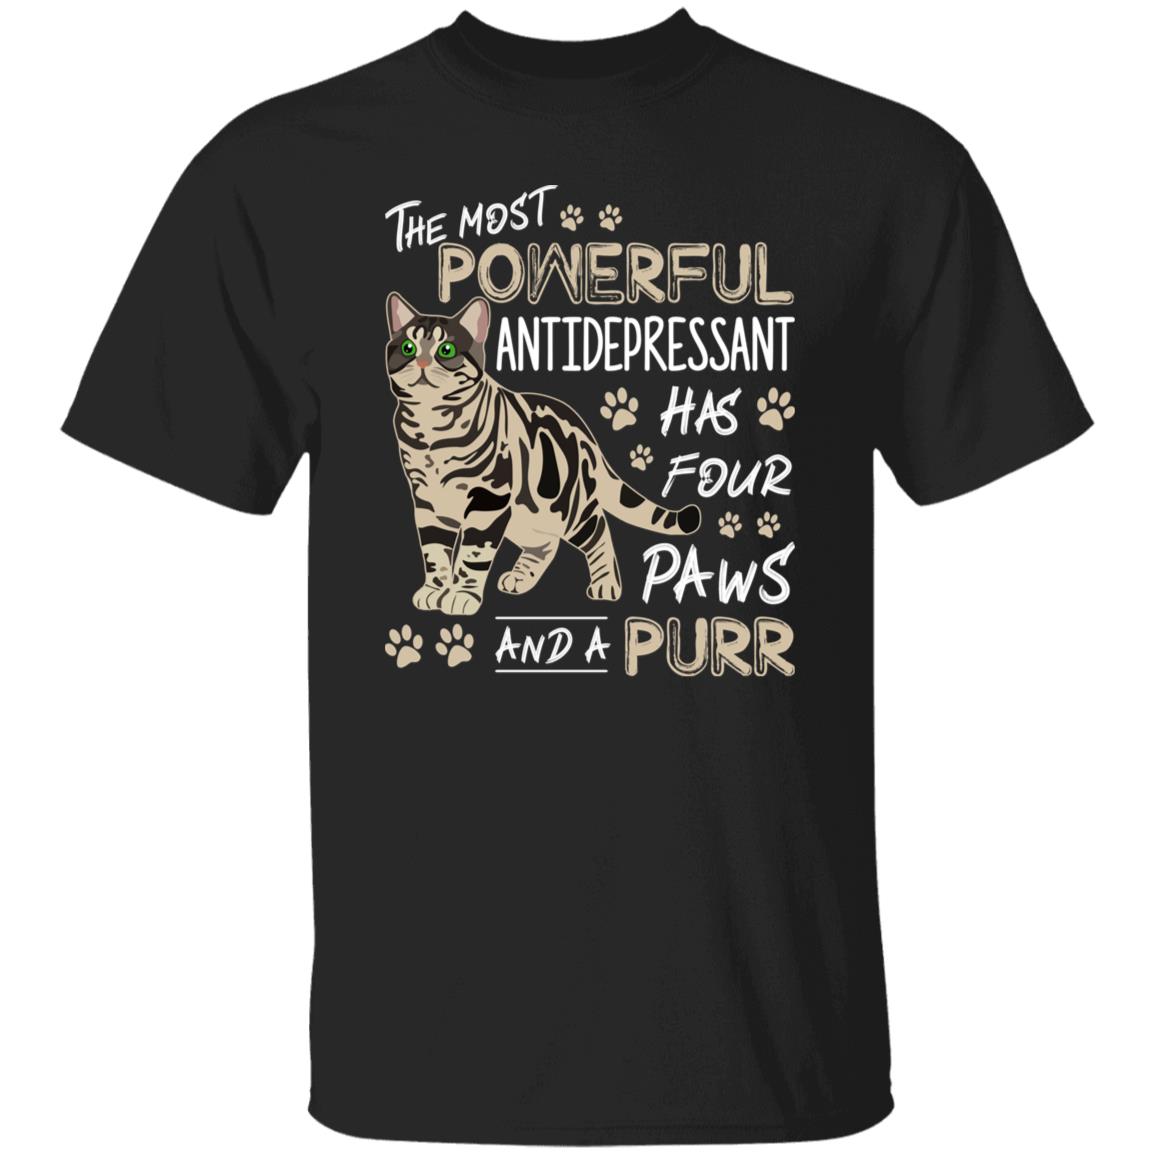 The most powerful antidepressant has four paws Unisex shirt Black Dark Heather-Family-Gift-Planet